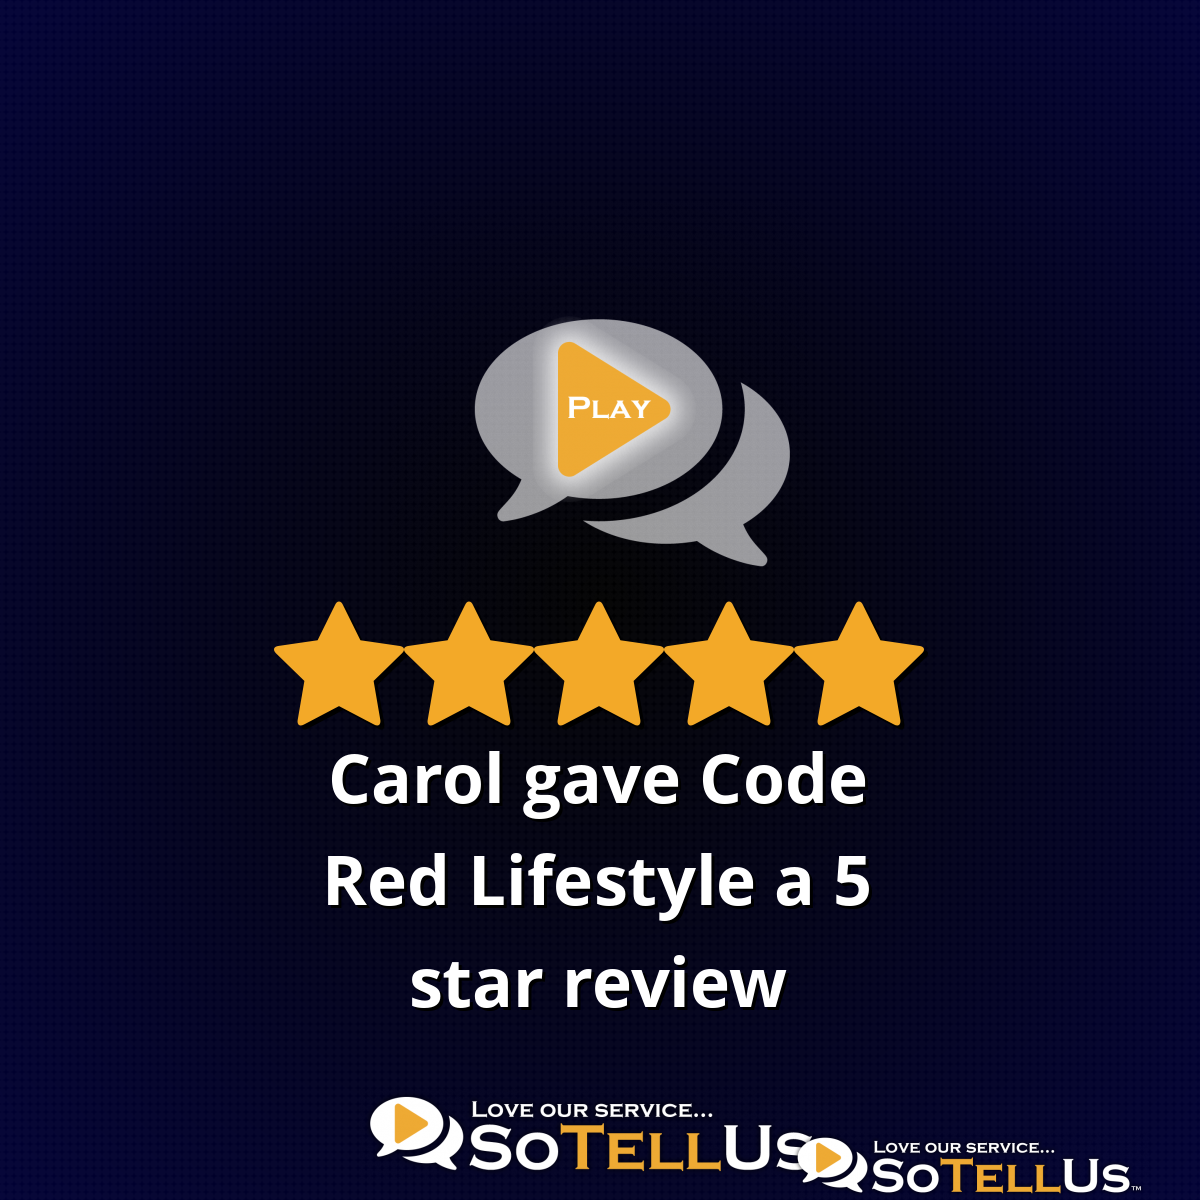 Carol M gave Code Red Lifestyle a 5 star review on SoTellUs